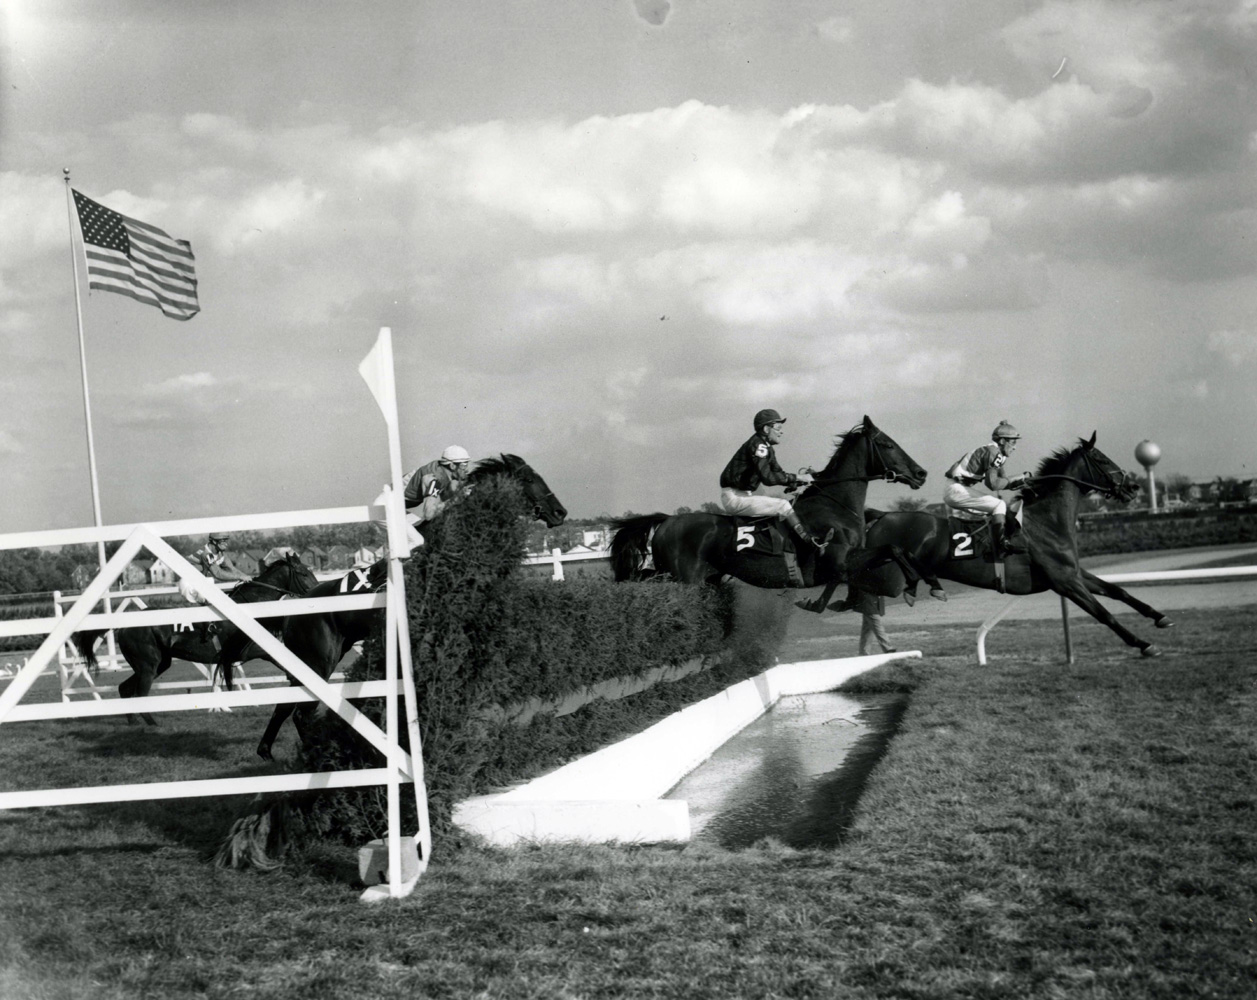 Joe Aitcheson and Peal clear the water obstacle in the 1961 Temple Gwathmey at Aqueduct (Keeneland Library Morgan Collection/Museum Collection)